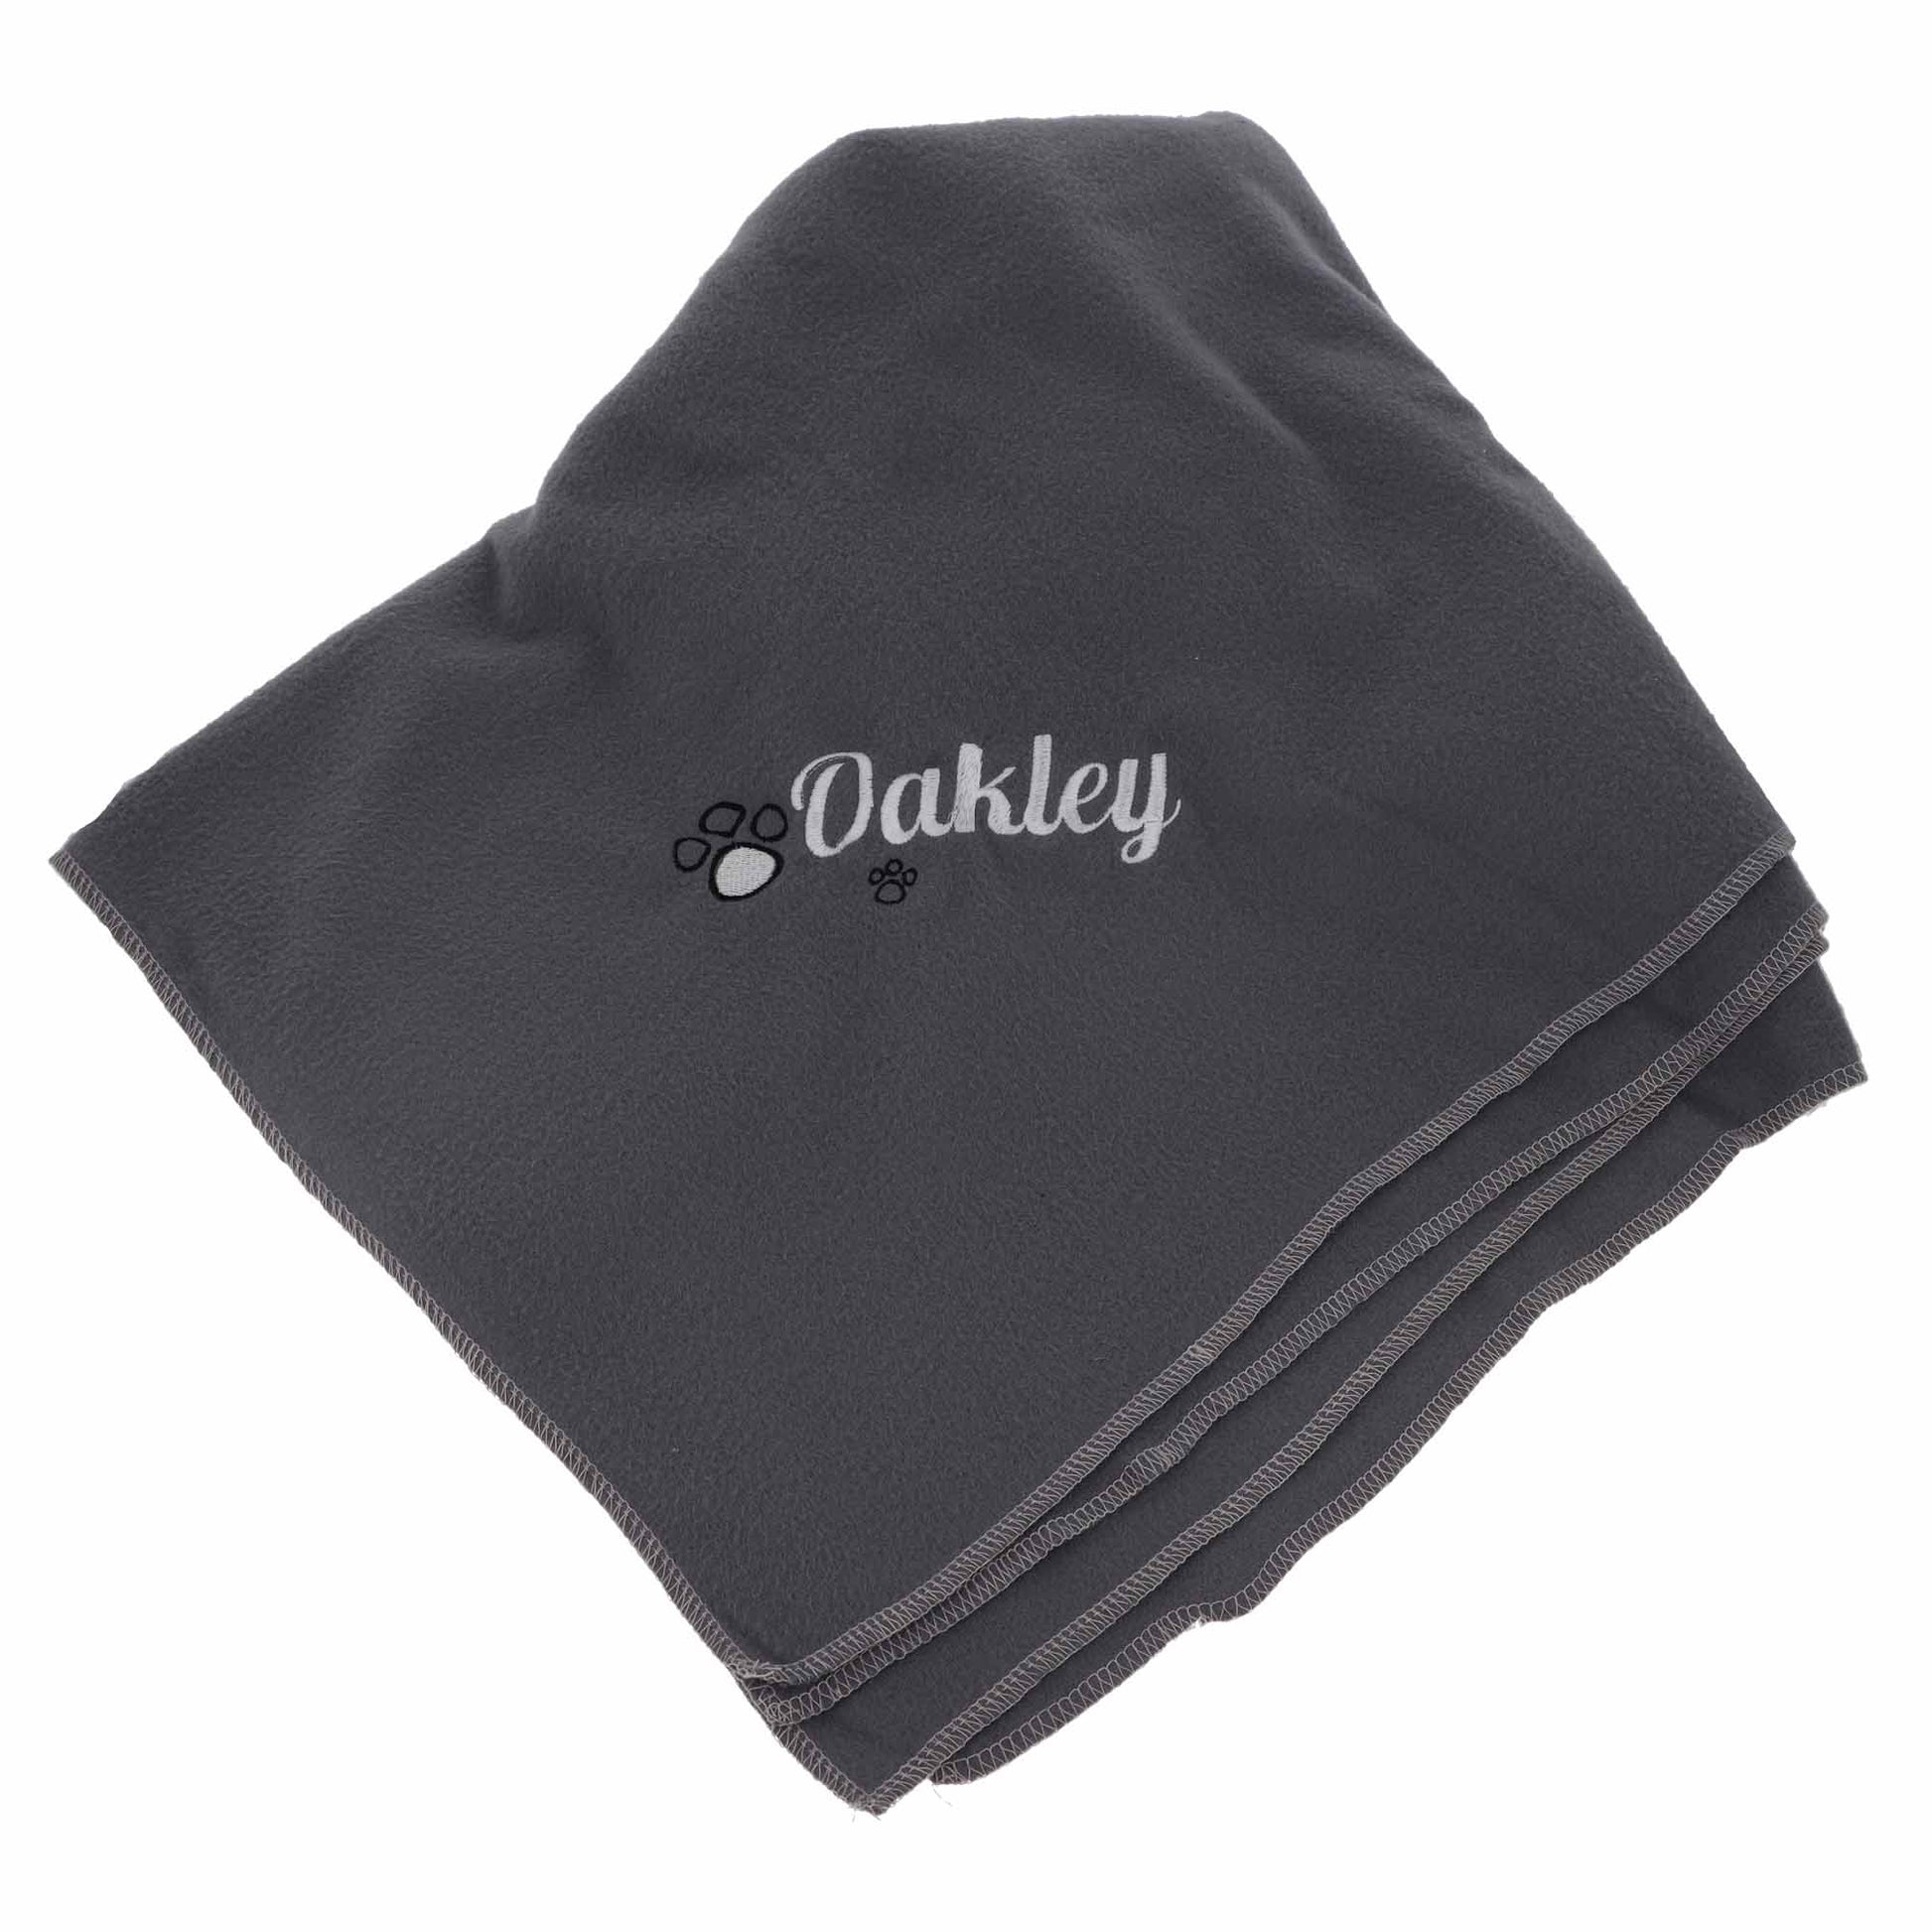 Personalised Dog Blanket Embroidered With Name  - Always Looking Good -   